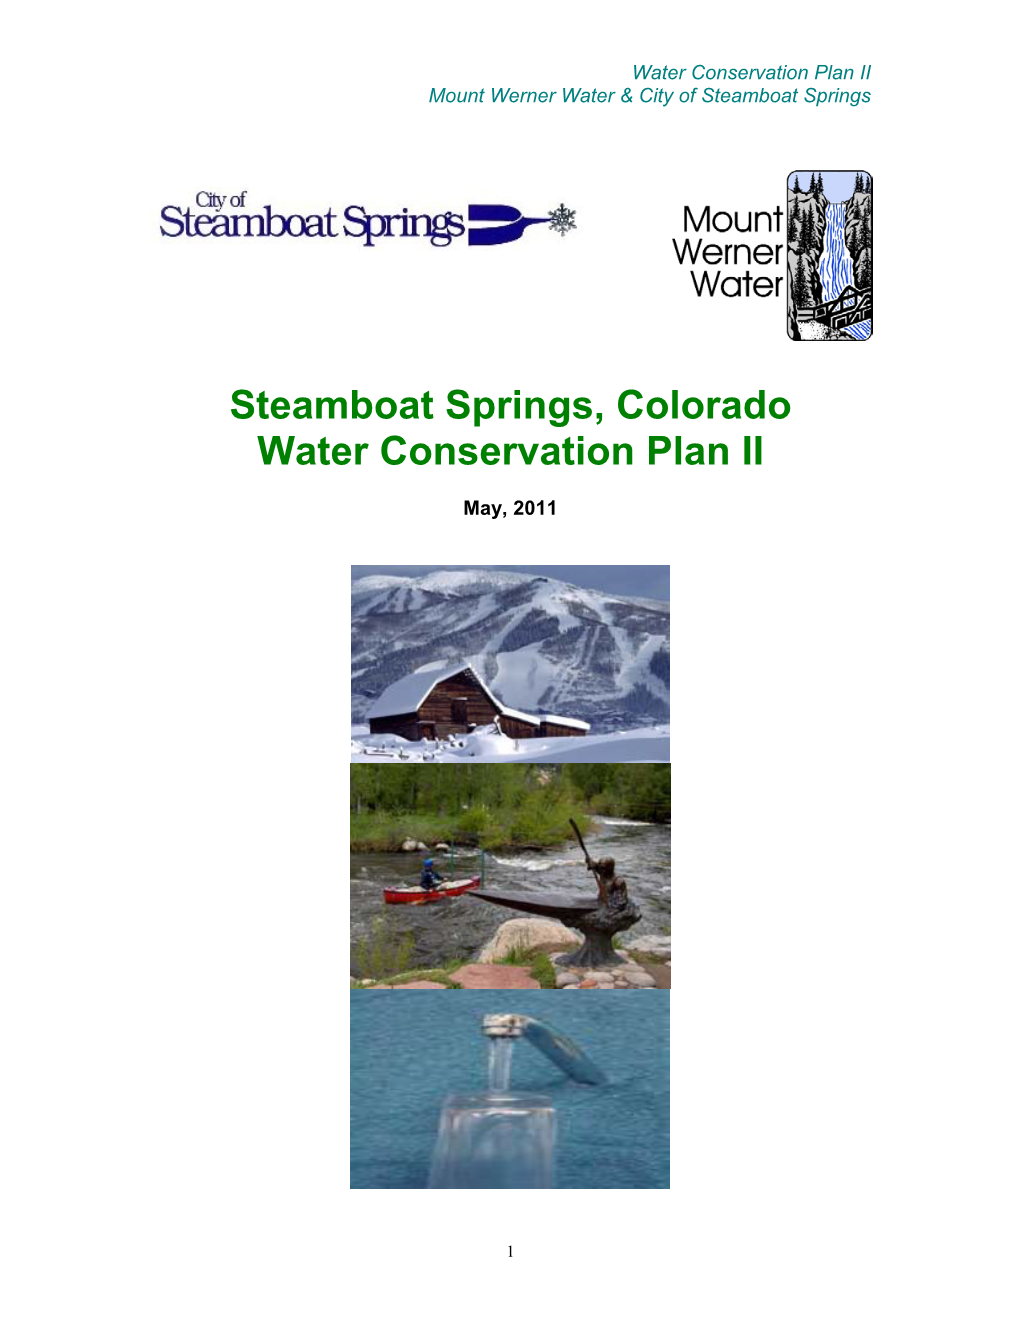 Steamboat Springs, Colorado Water Conservation Plan II